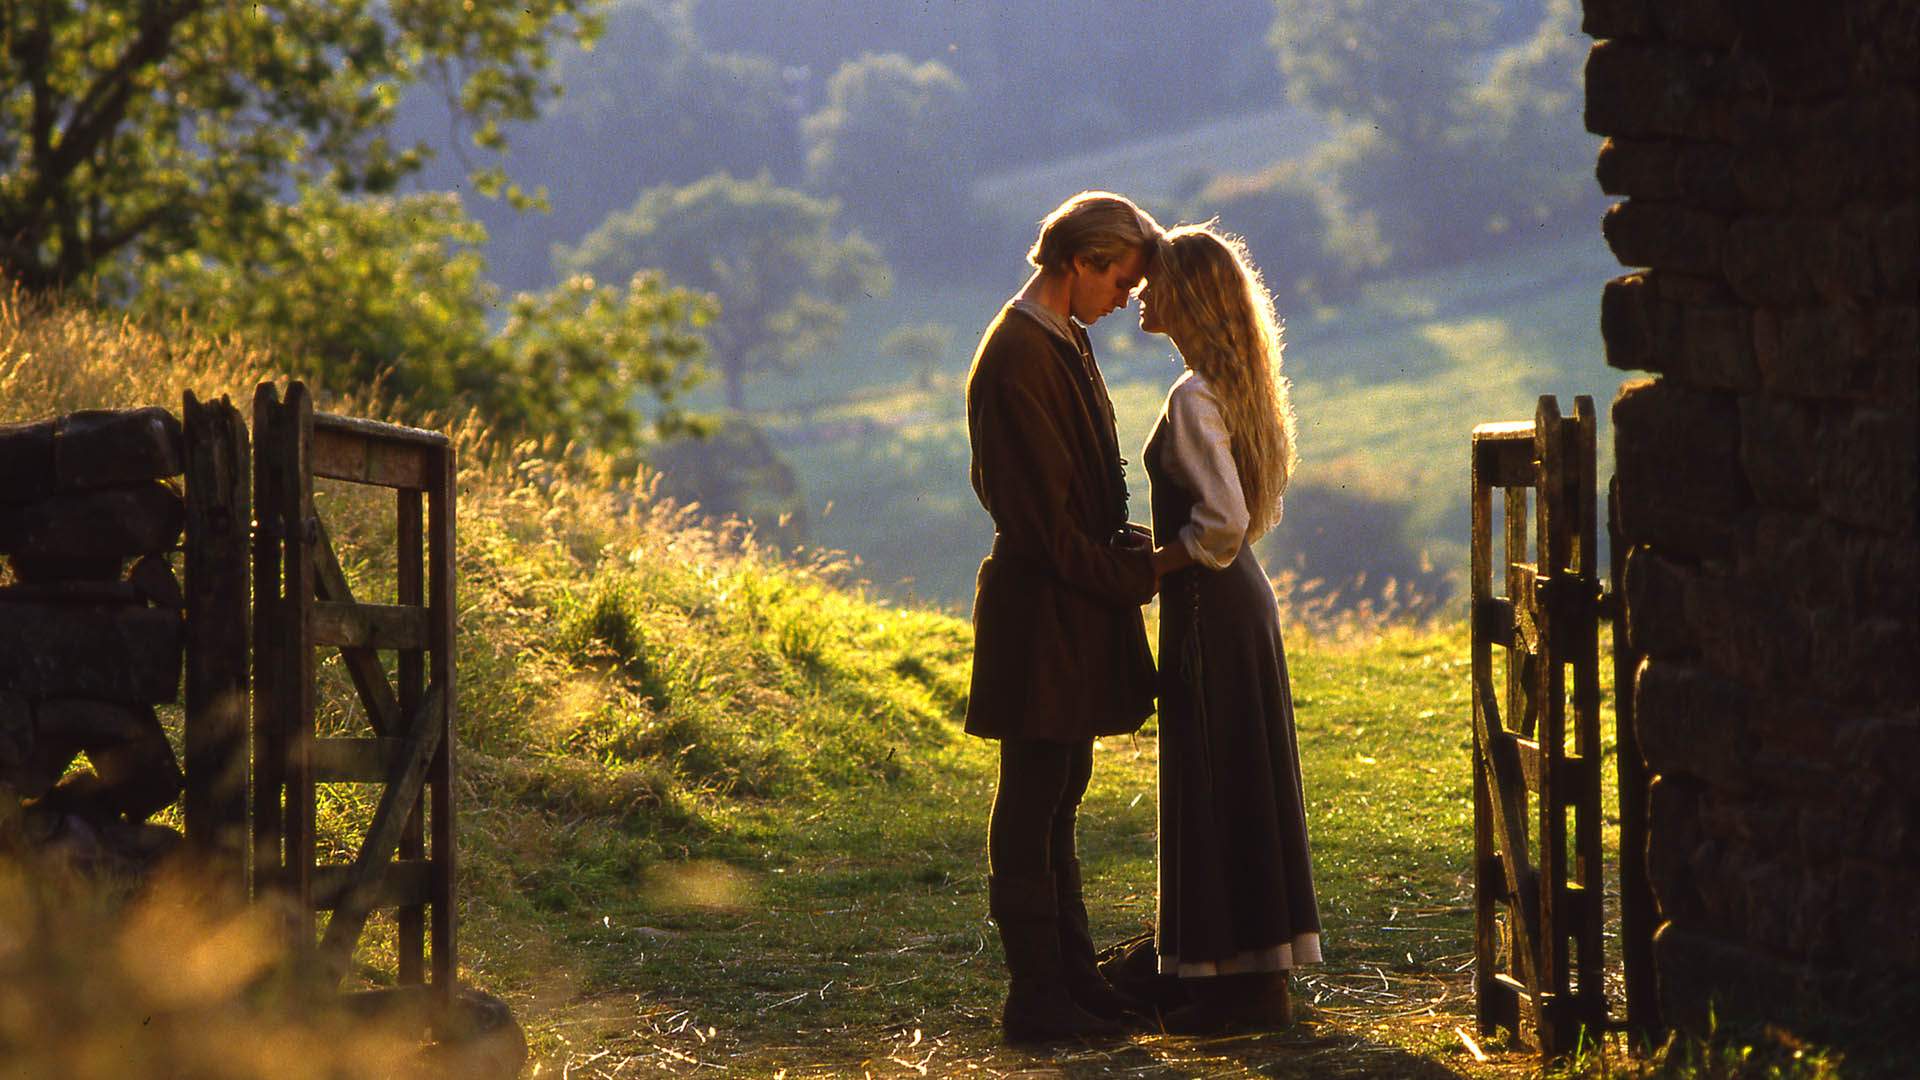 As You Wish: 'The Princess Bride' Is Screening at Sydney Opera House with a Live Orchestra